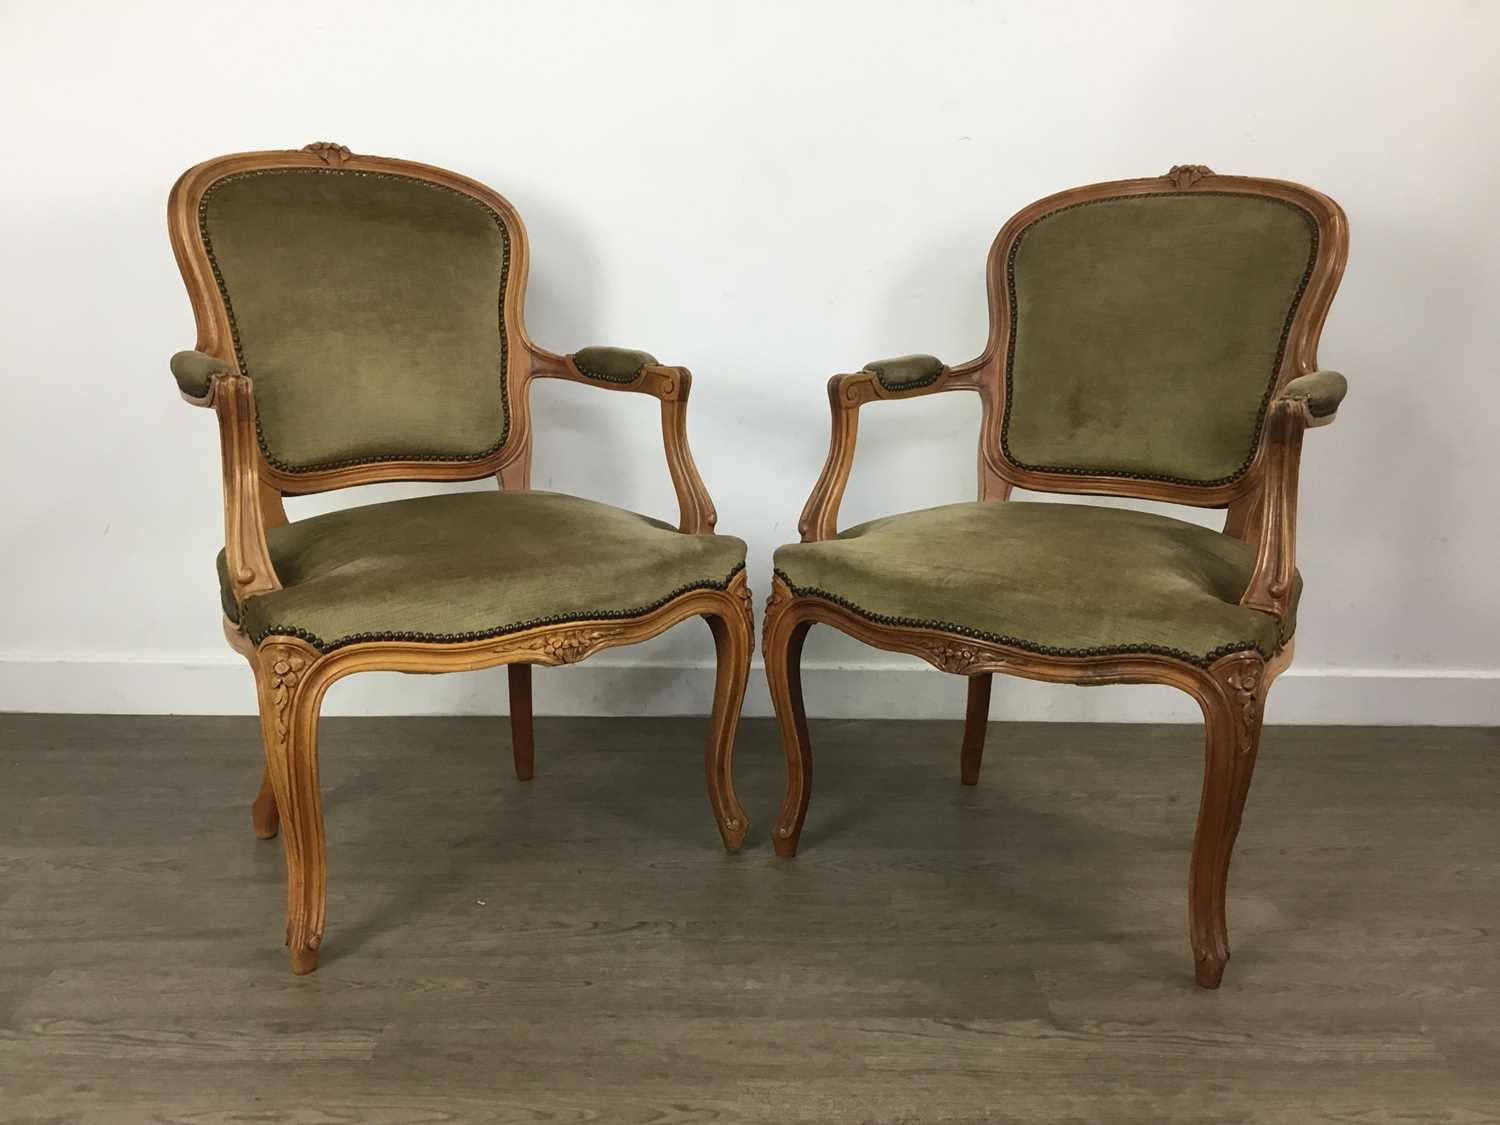 PAIR OF FRENCH STYLE FAUTEUIL ARMCHAIRS,